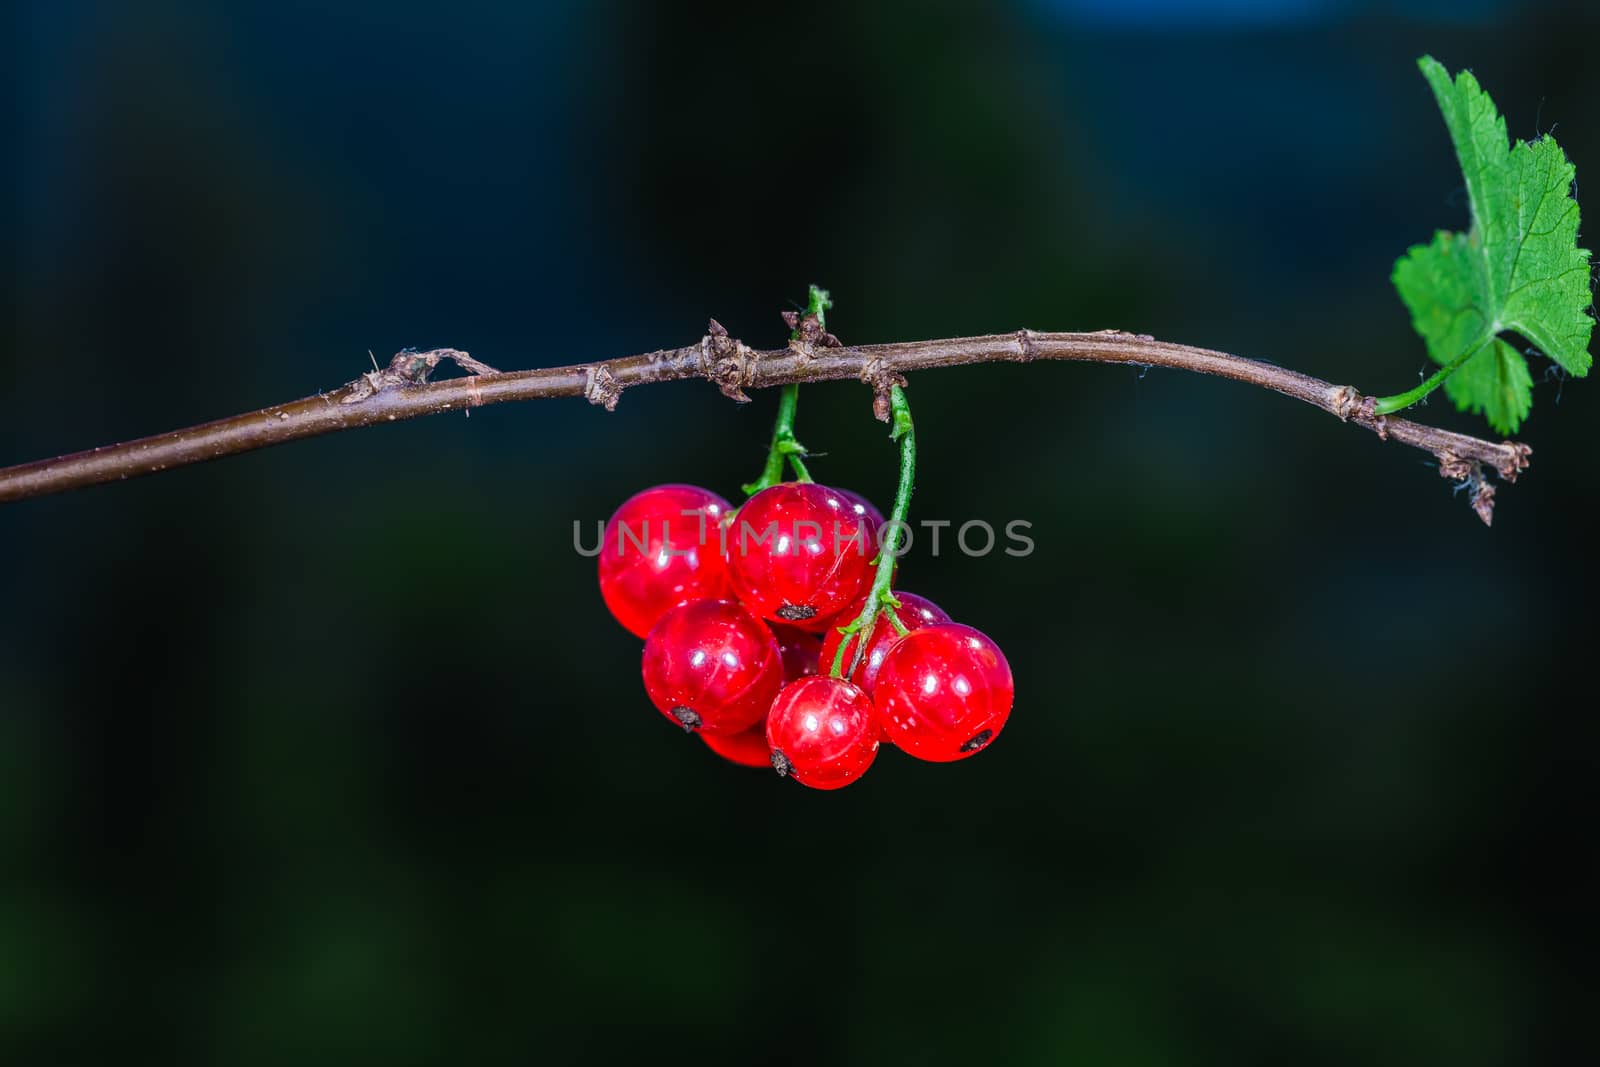 Amazing little juicy red currants by petkolophoto